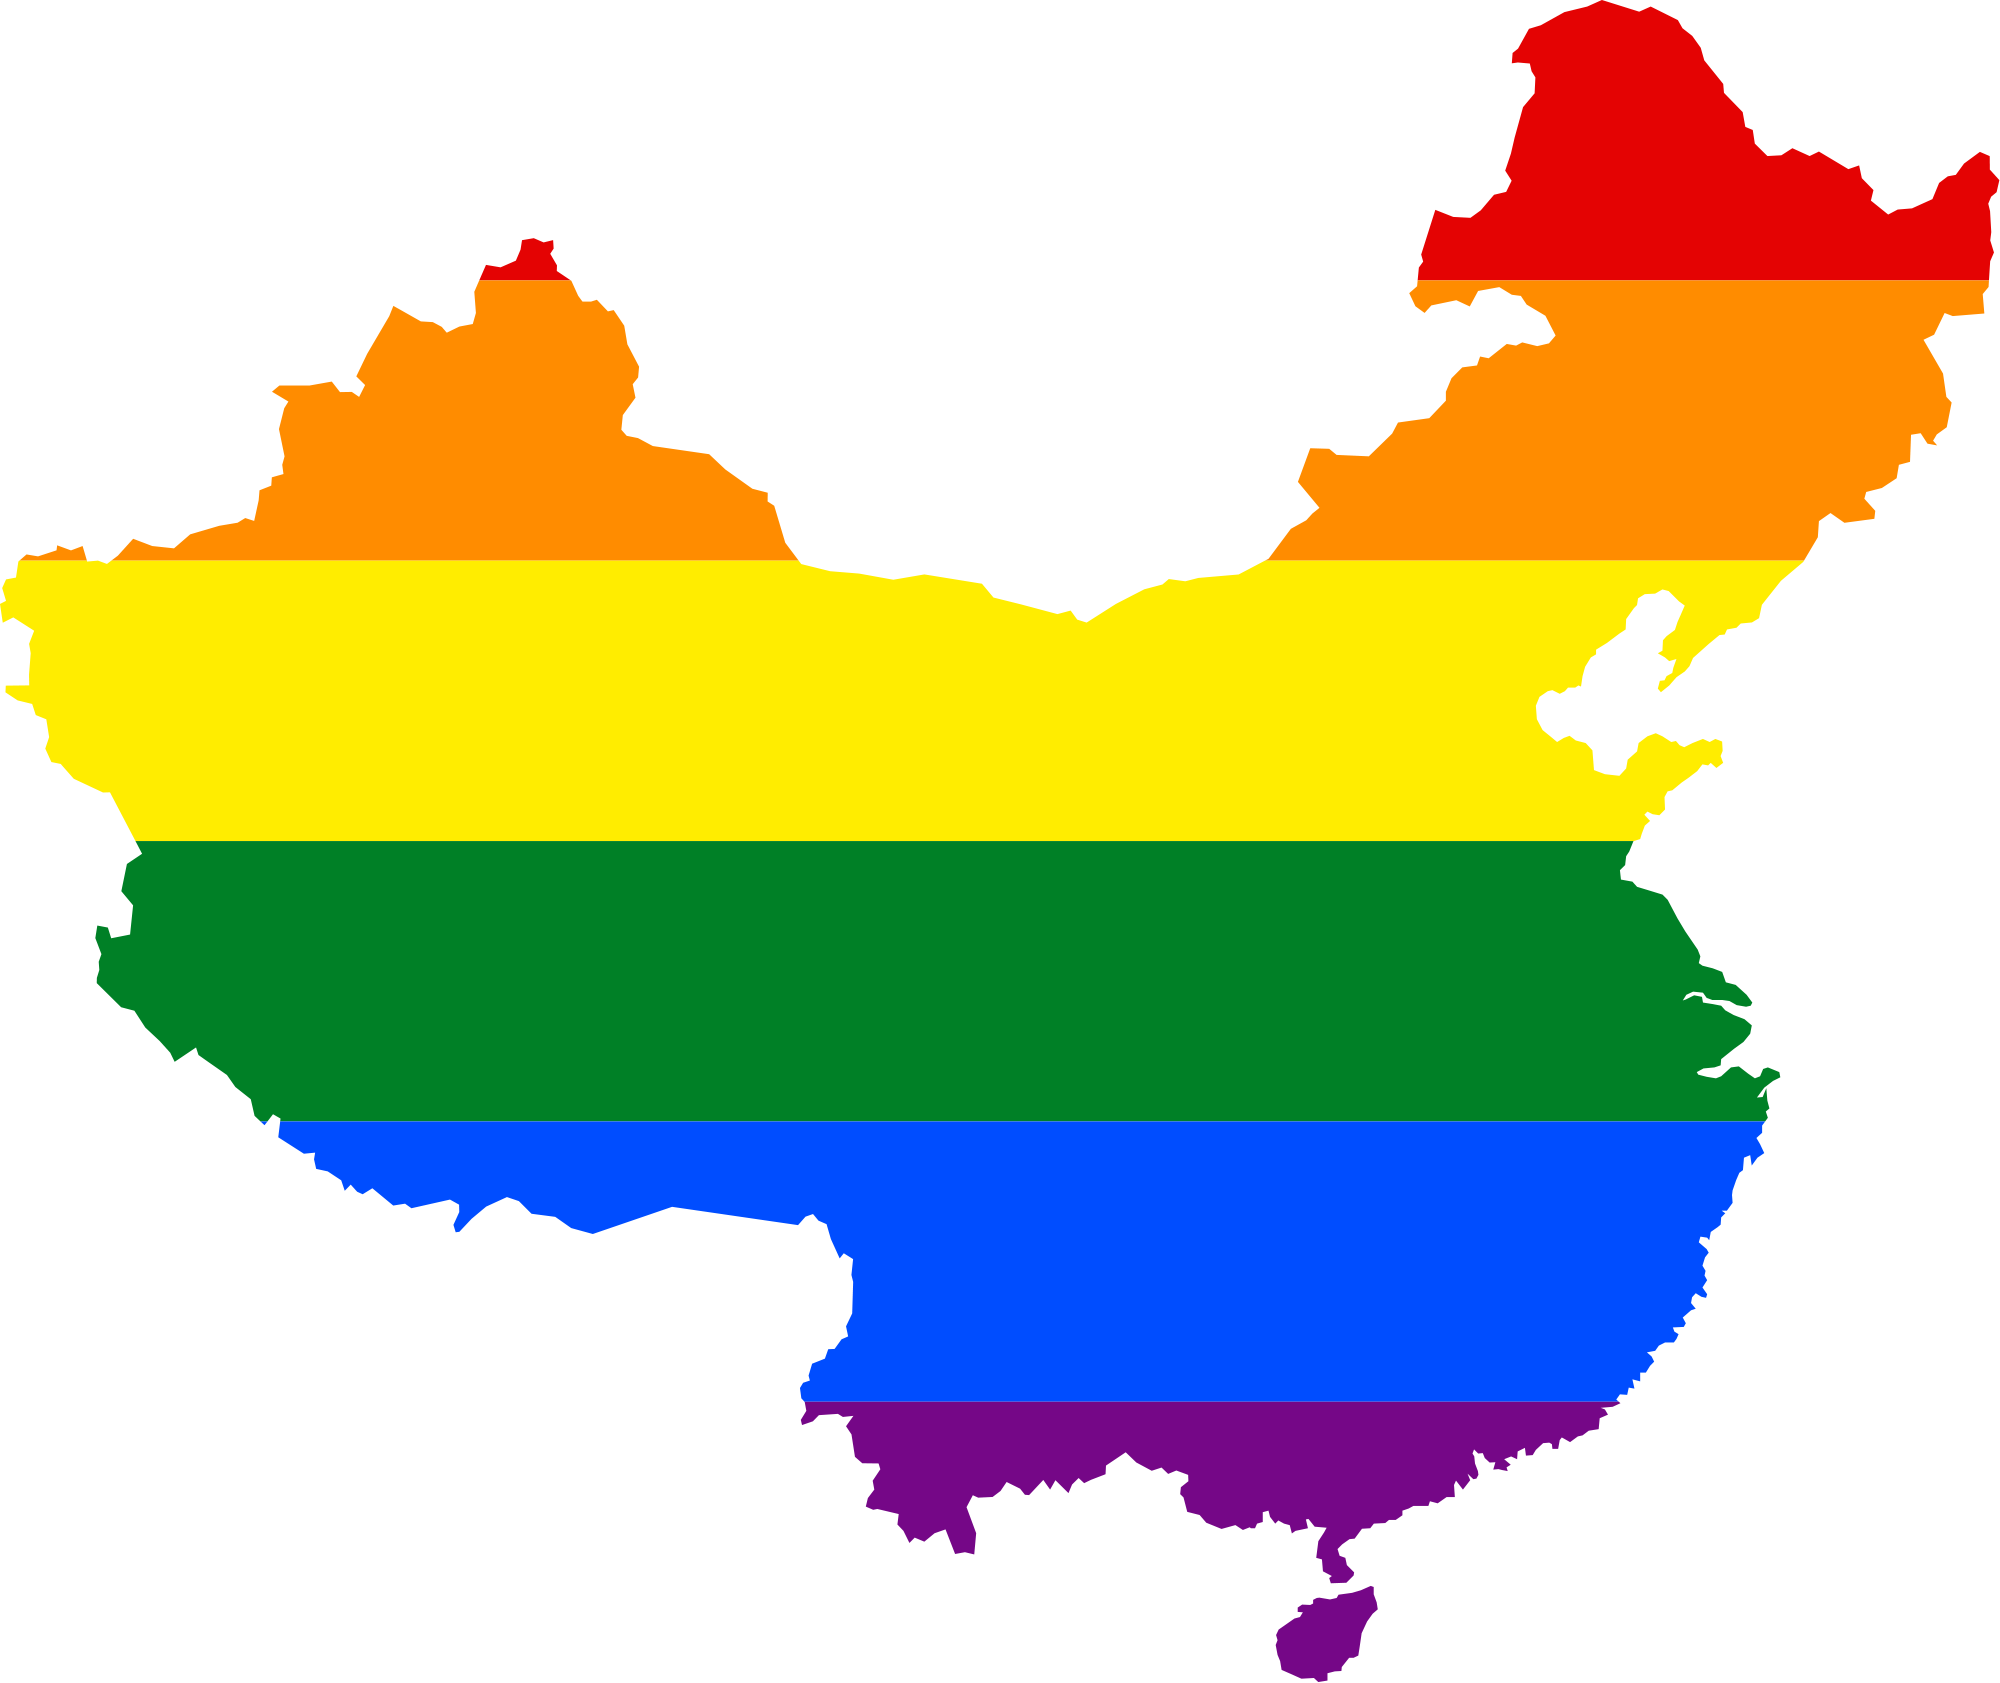 A Map Of China With Rainbow Colors